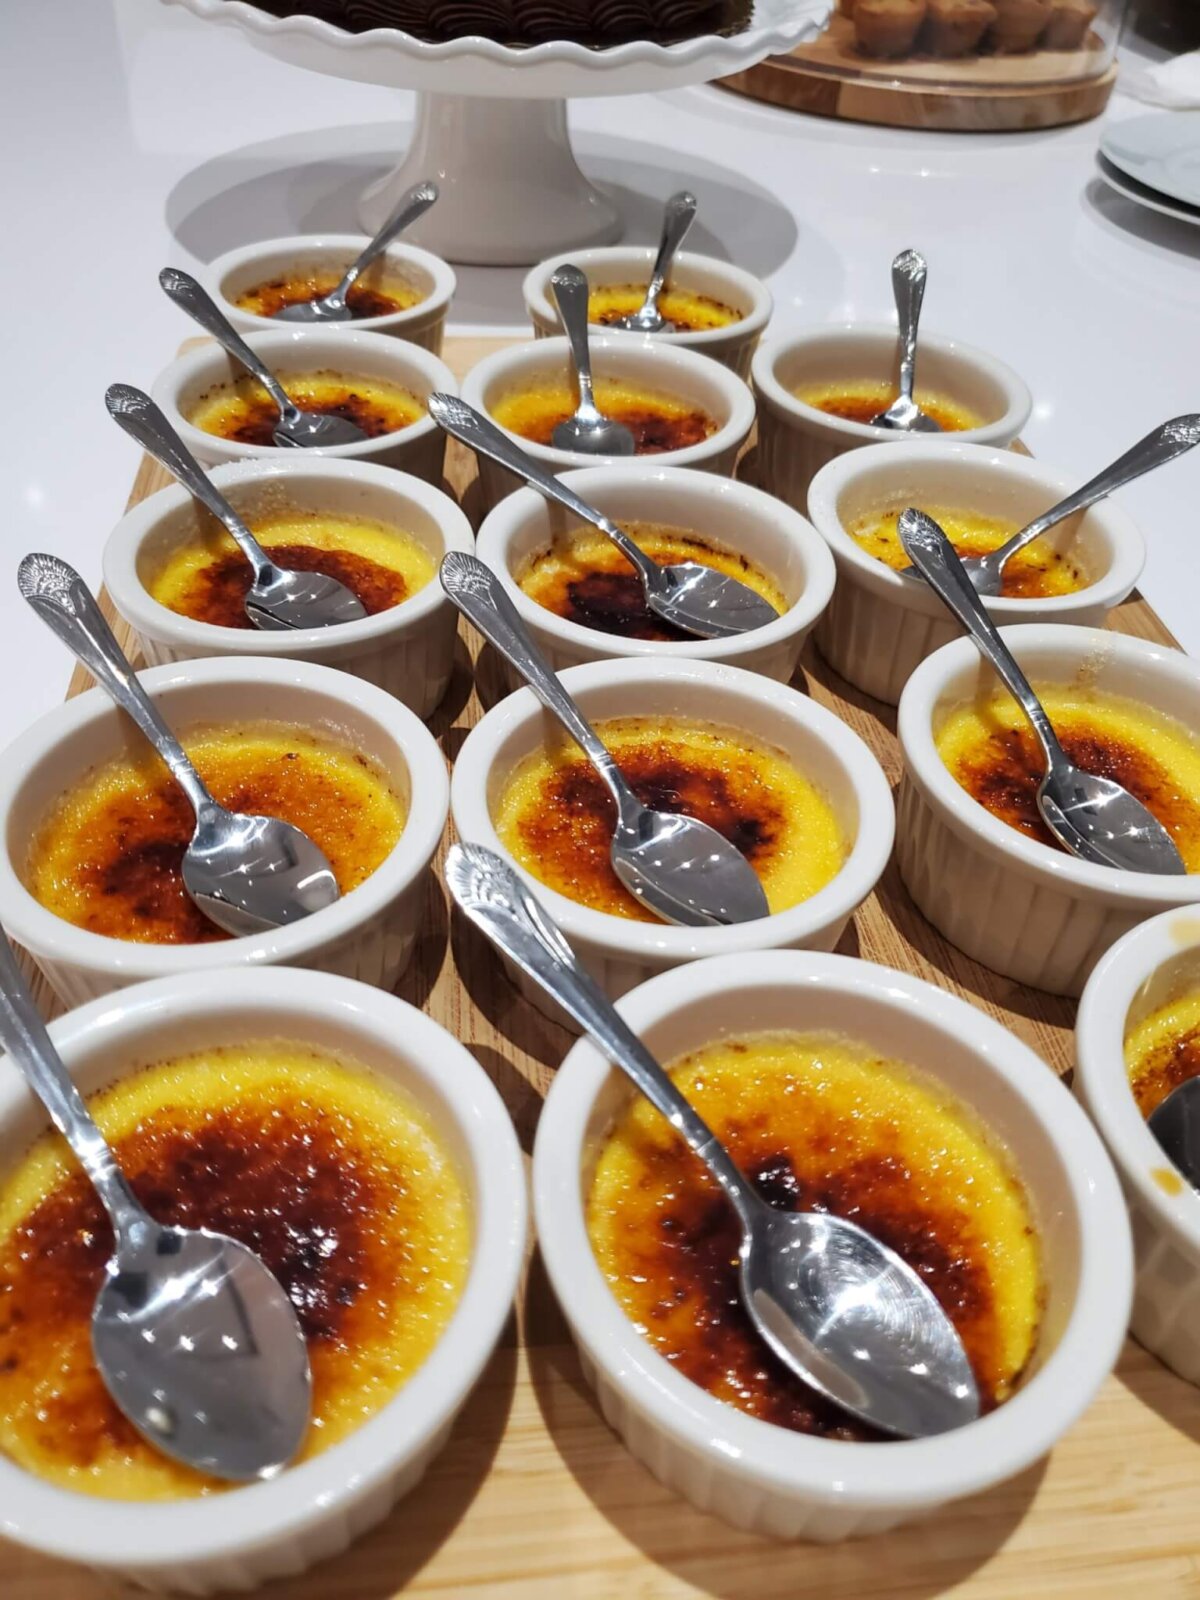 small bowls of Crème brûlée with steel spoons